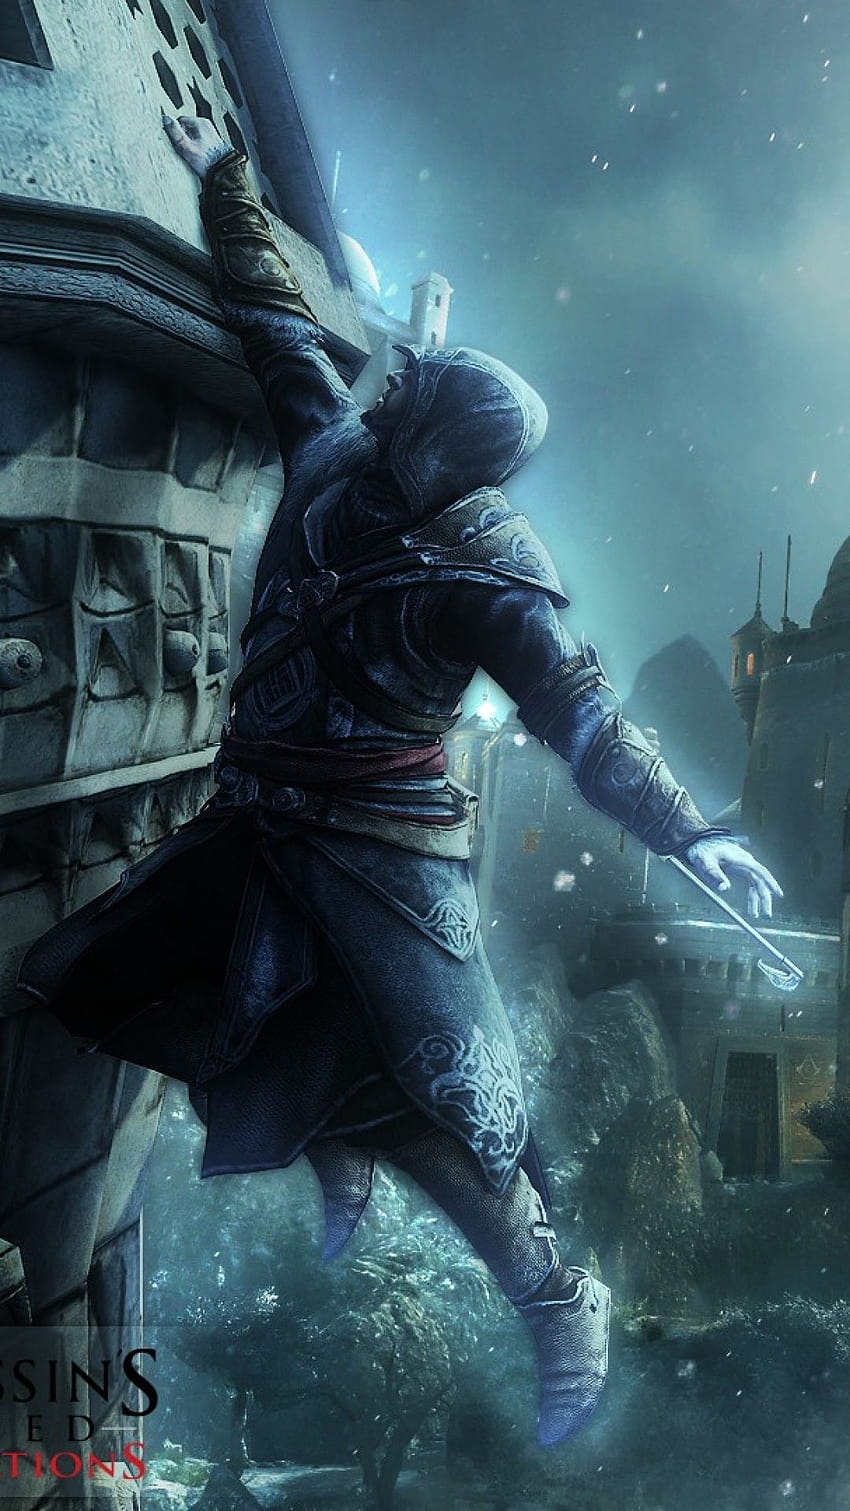 Download this Wallpaper iPhone 6 - Video Game/Assassin's